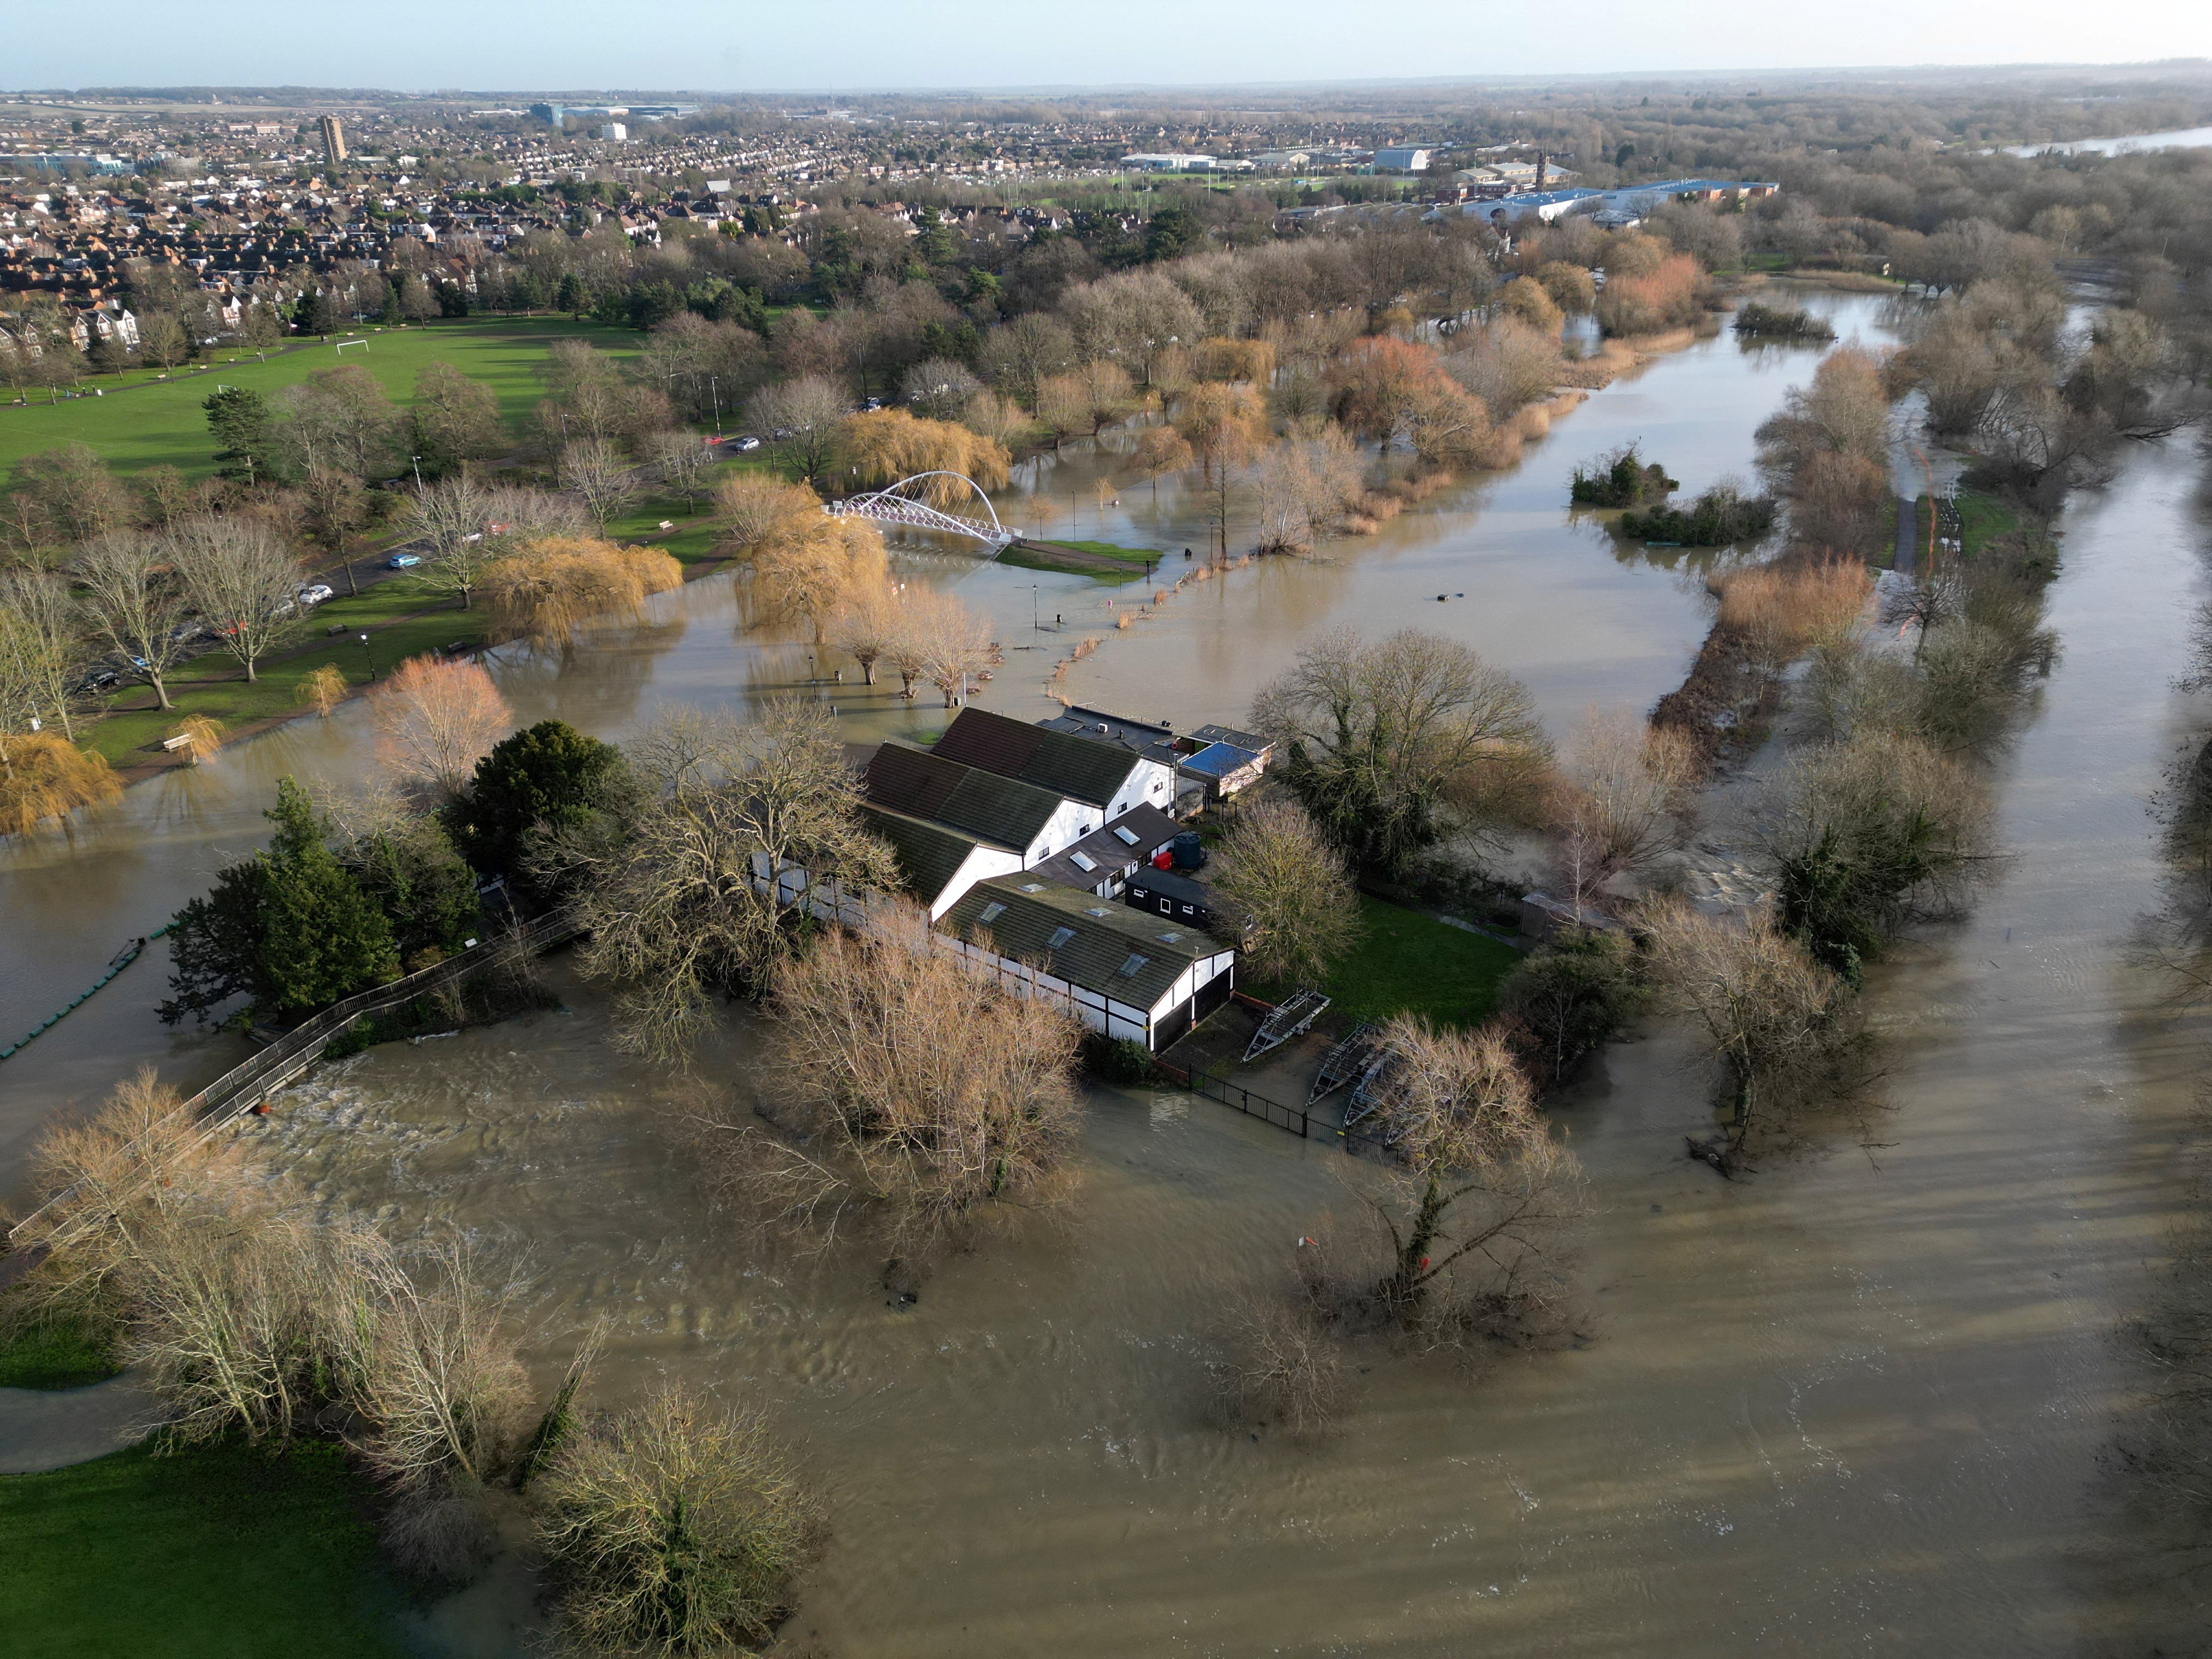 pWater from River Great Ouse floods Bedford after Storm Henk, Britain/p